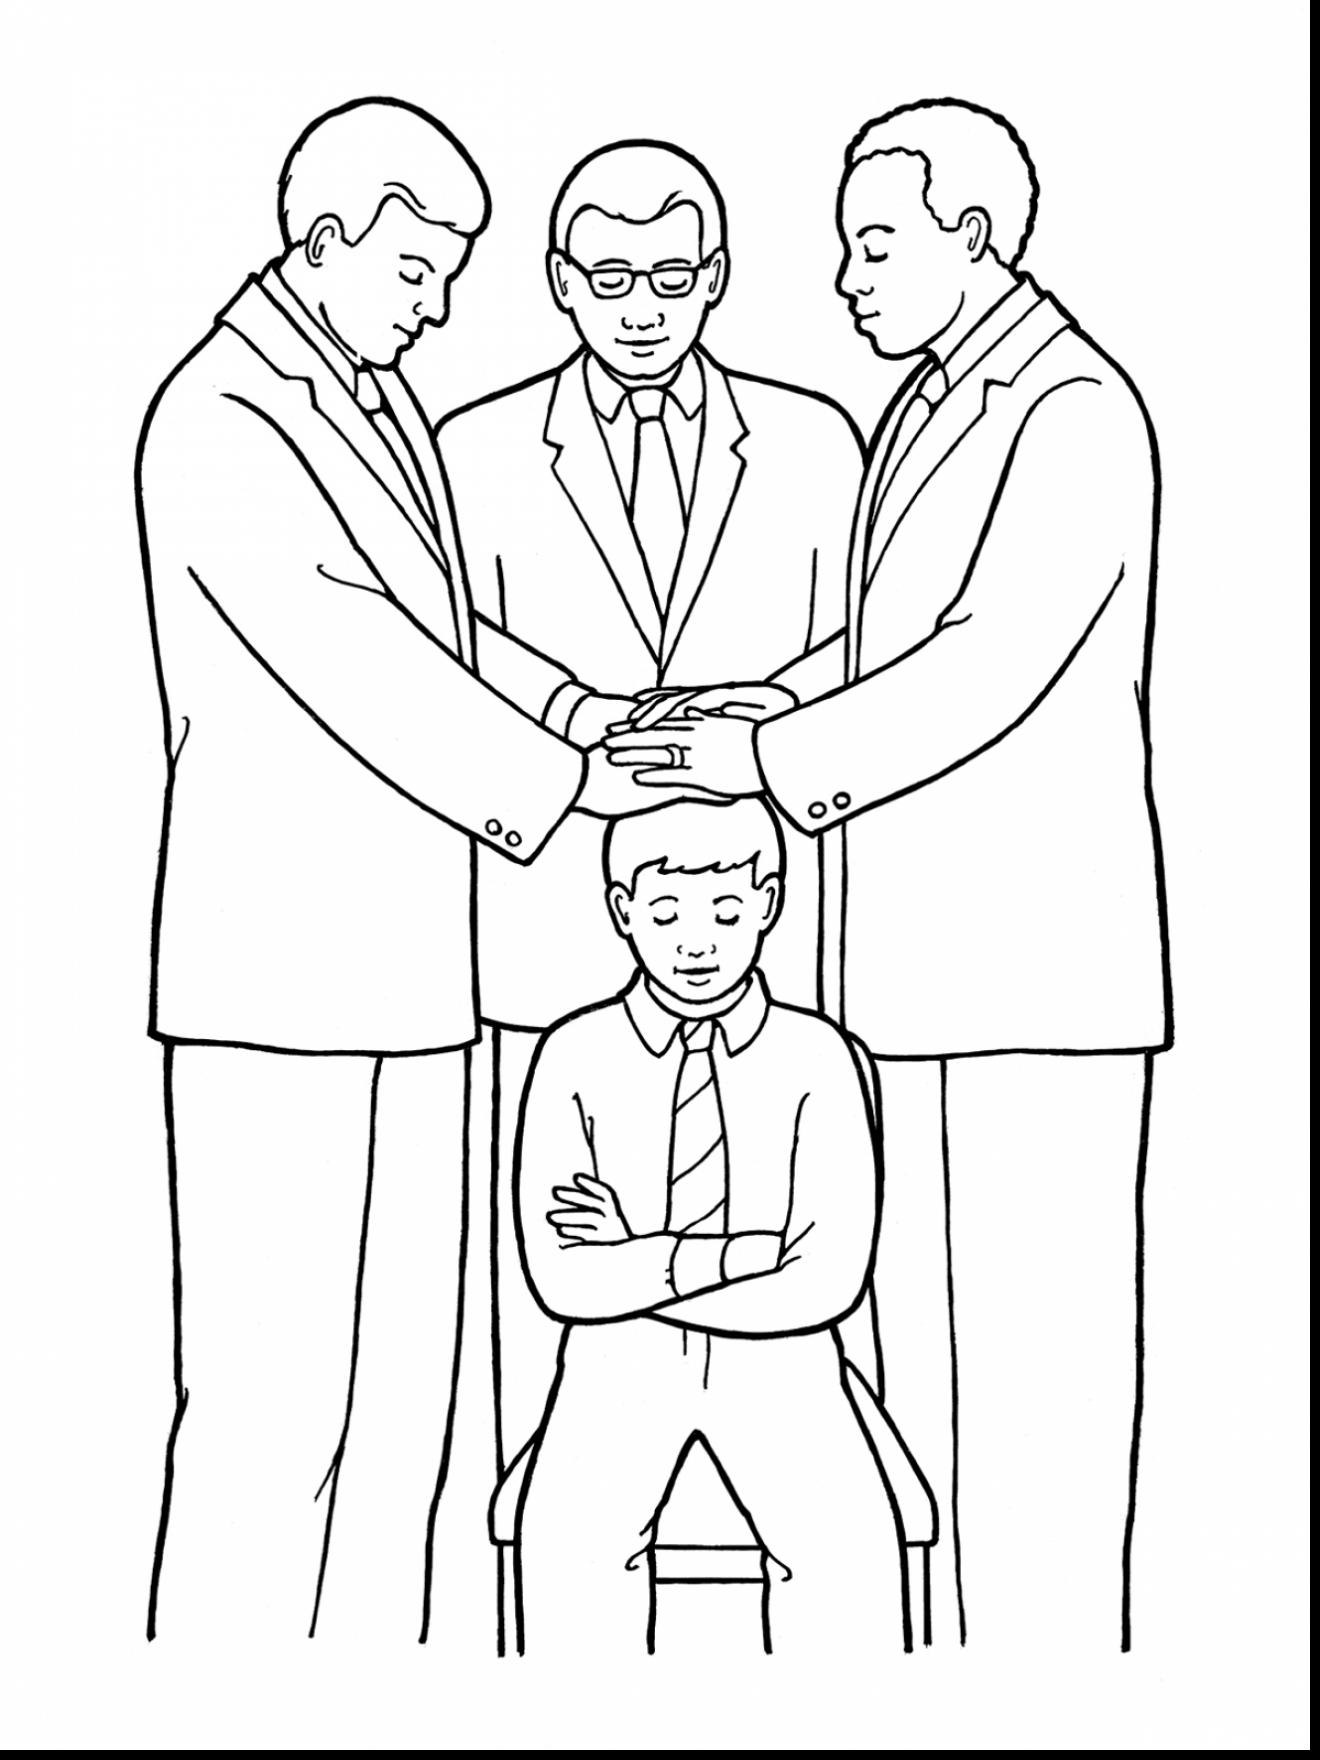 Marvelous Lds Missionary Coloring Page With Book Of Mormon - Coloring Home